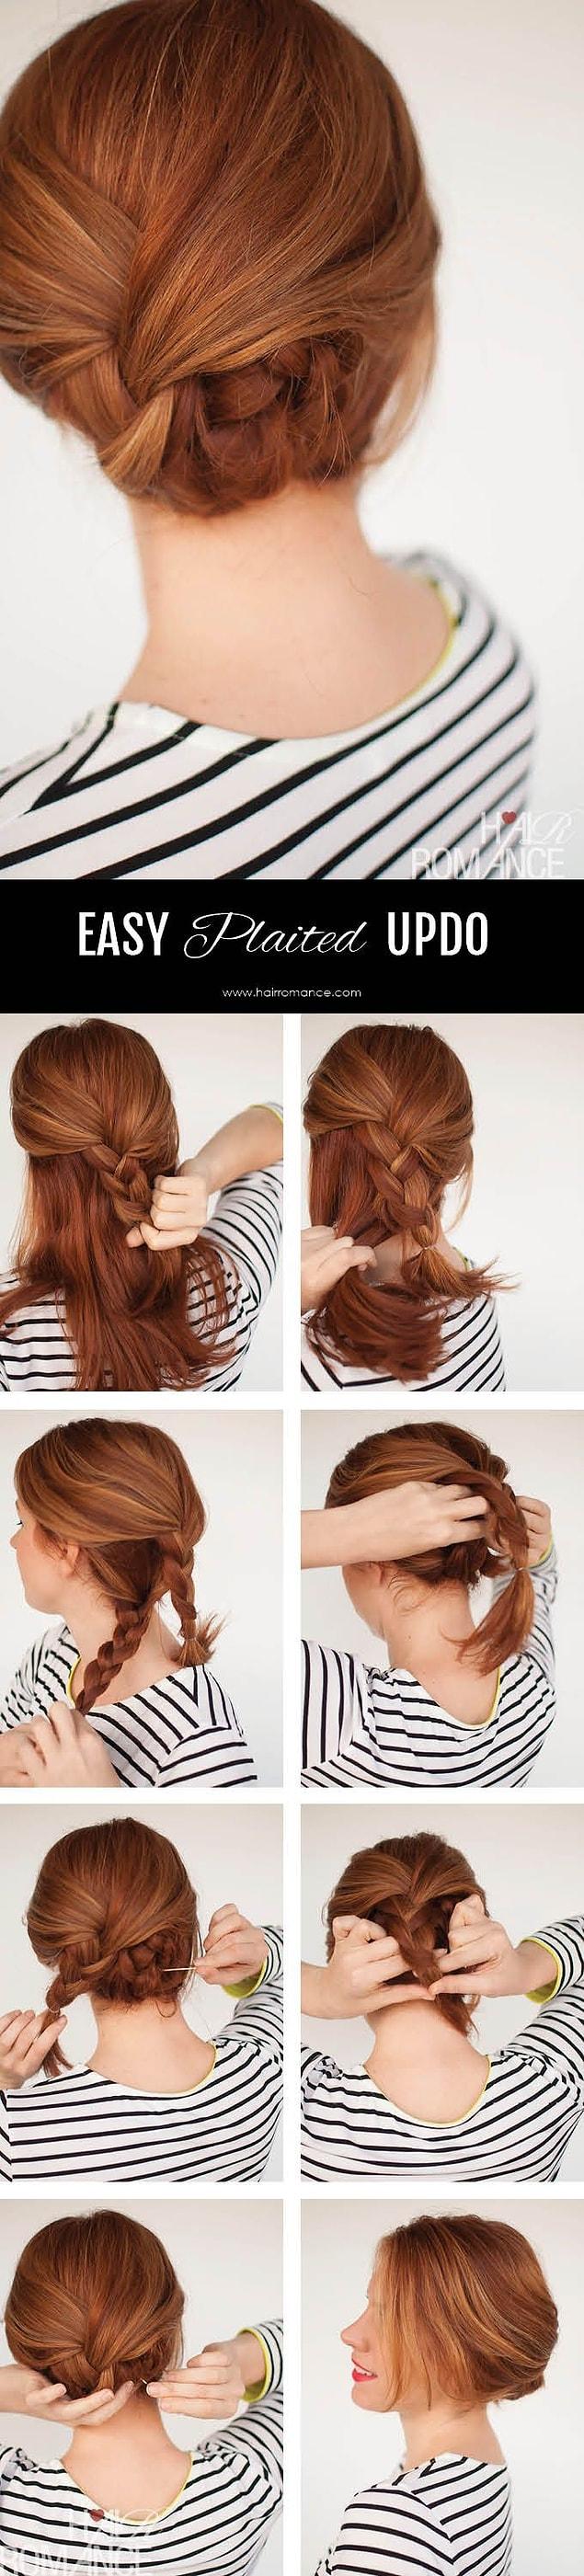 18. A super easy updo you can make out of two simple braids.